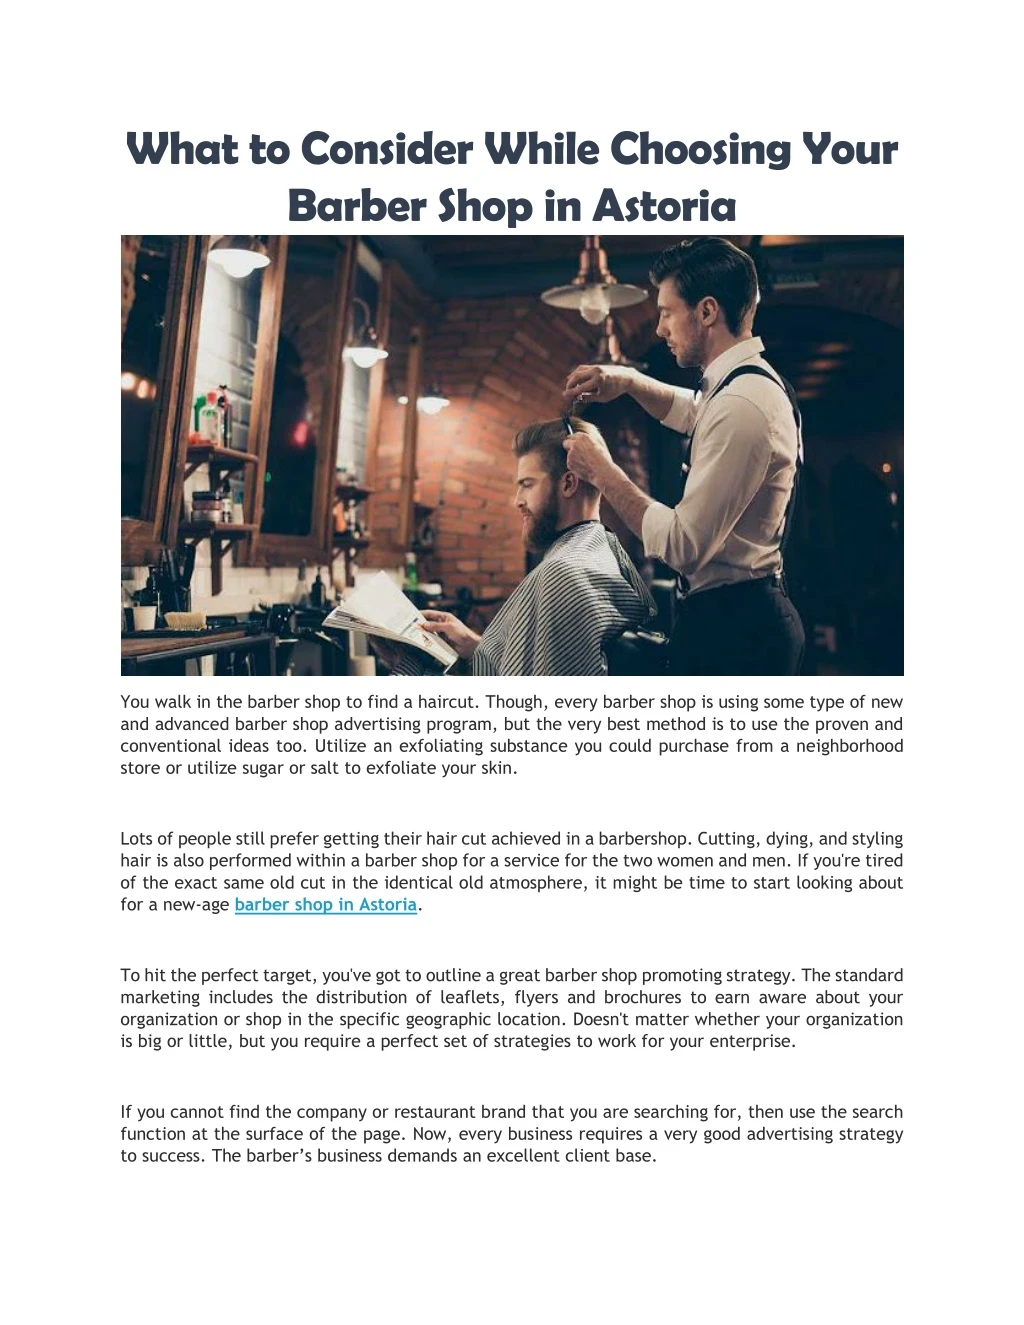 what to consider while choosing your barber shop